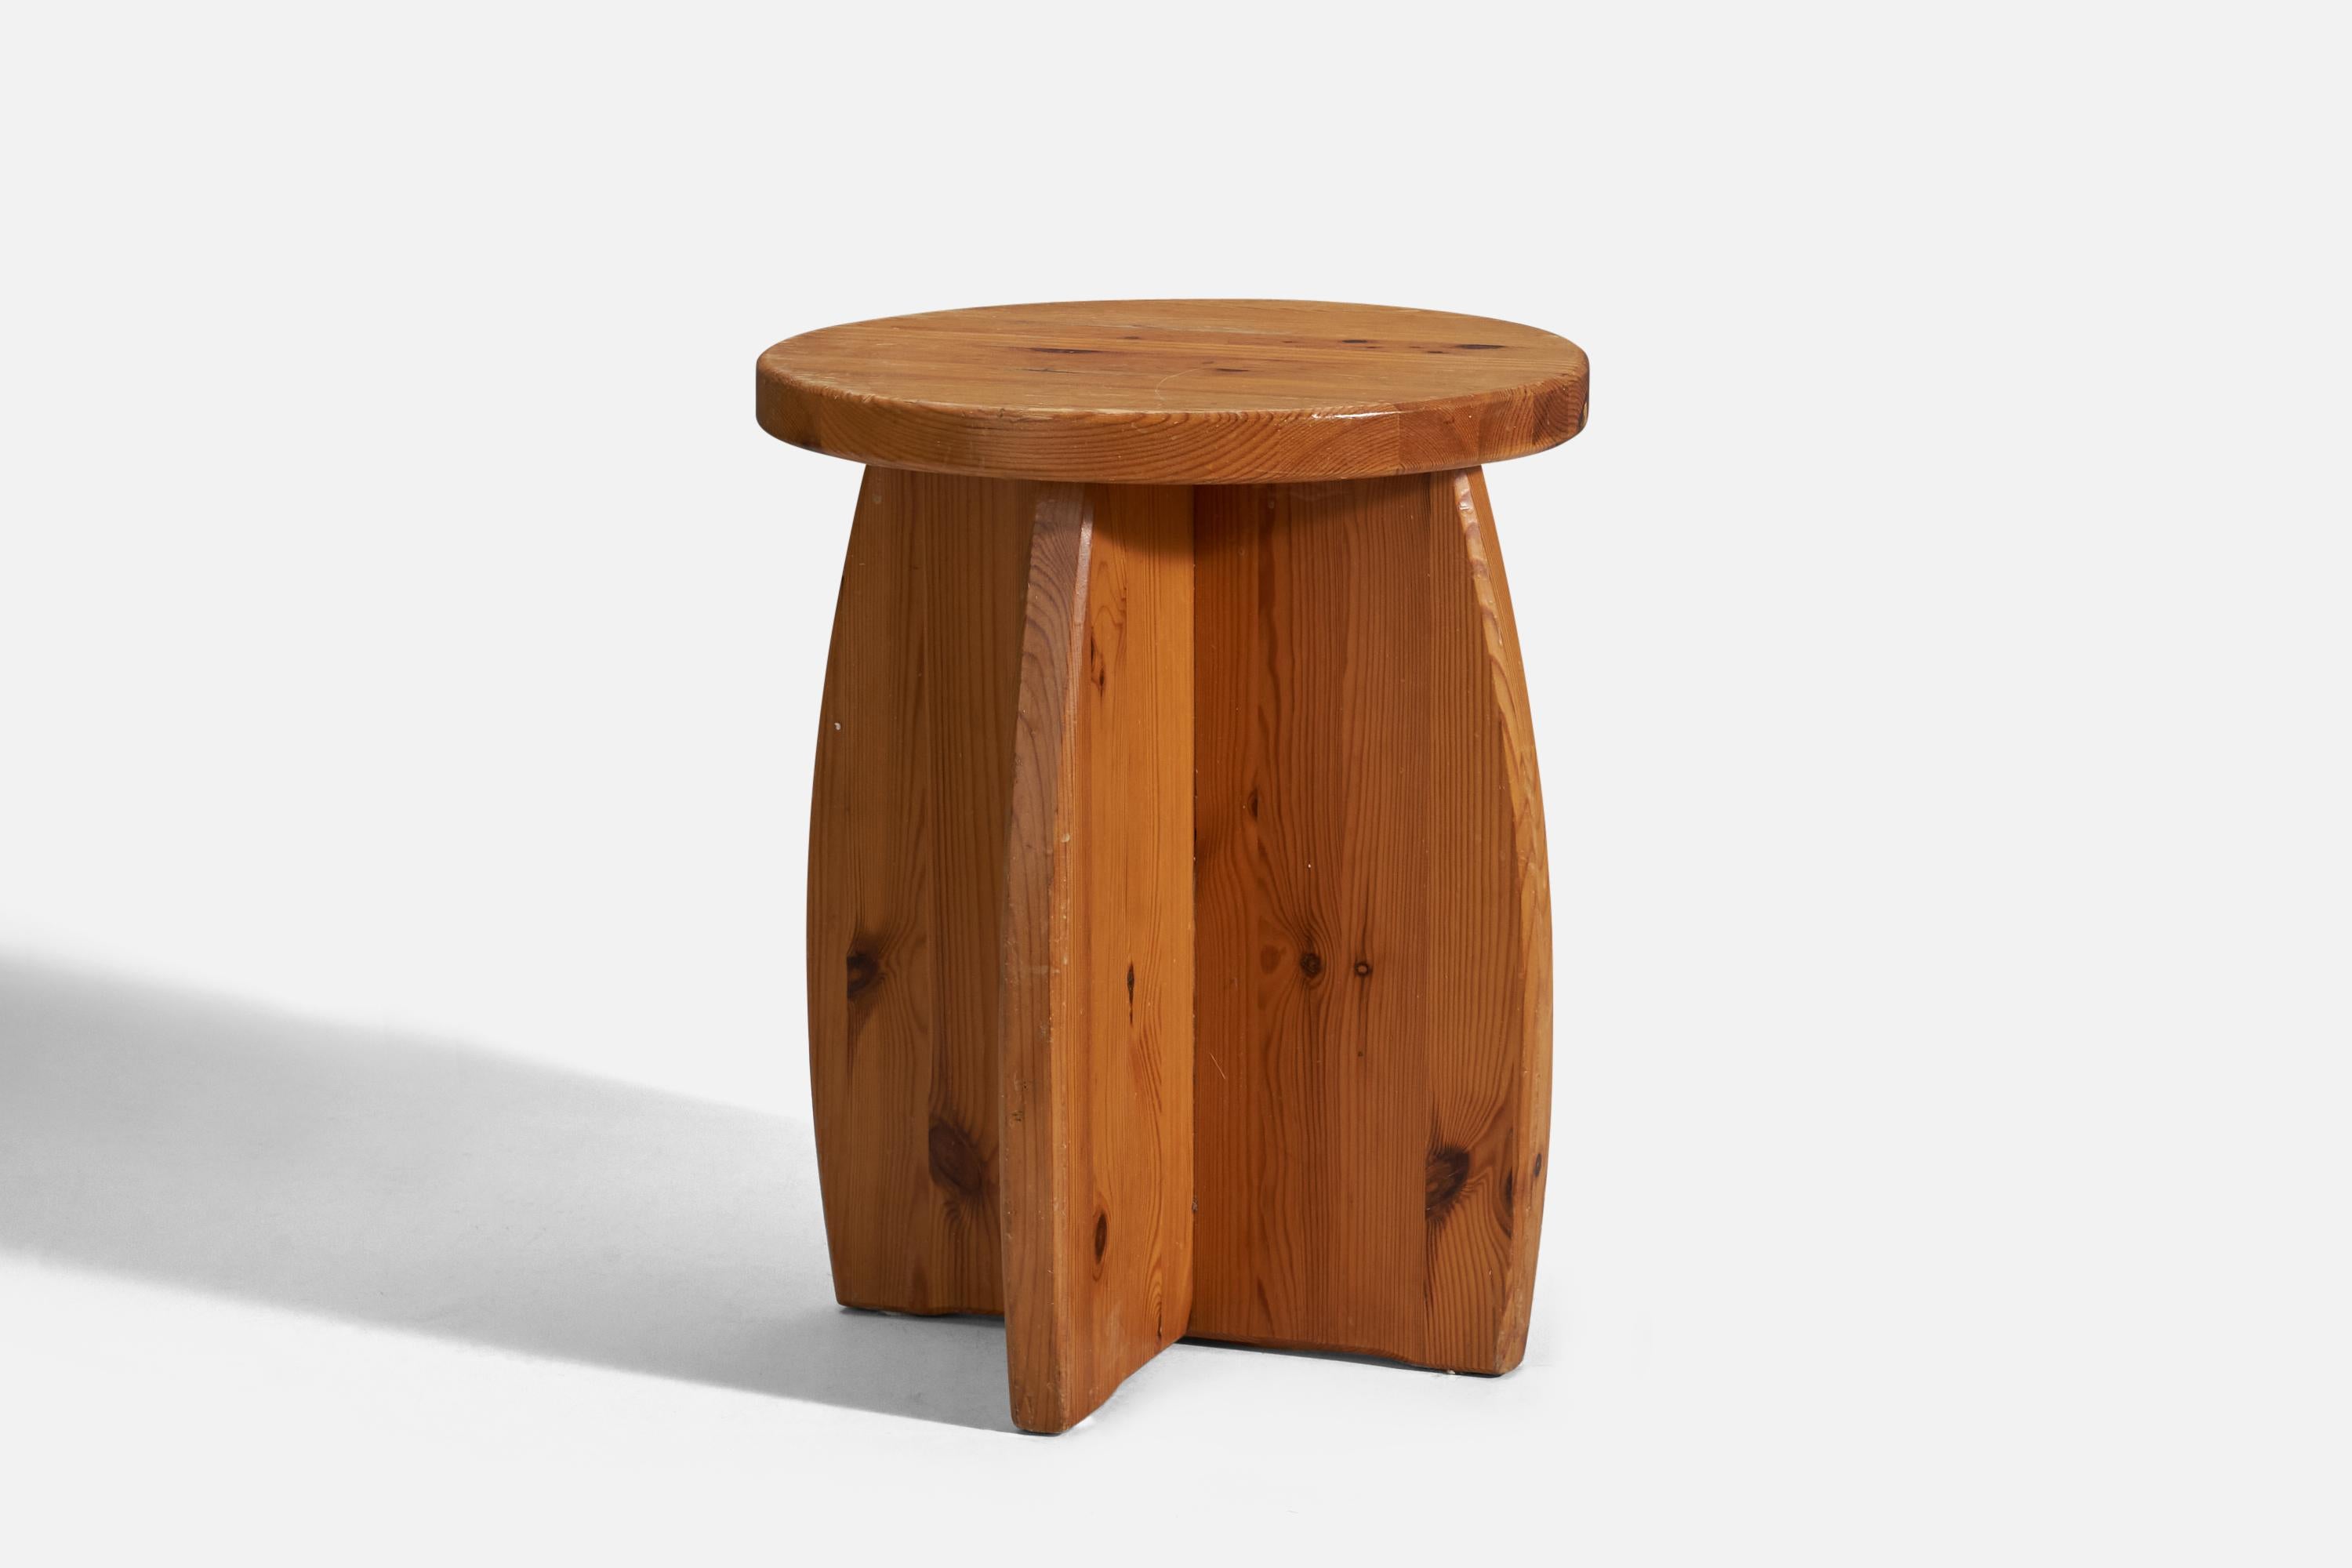 A pine stool designed and produced in Sweden, 1970s.